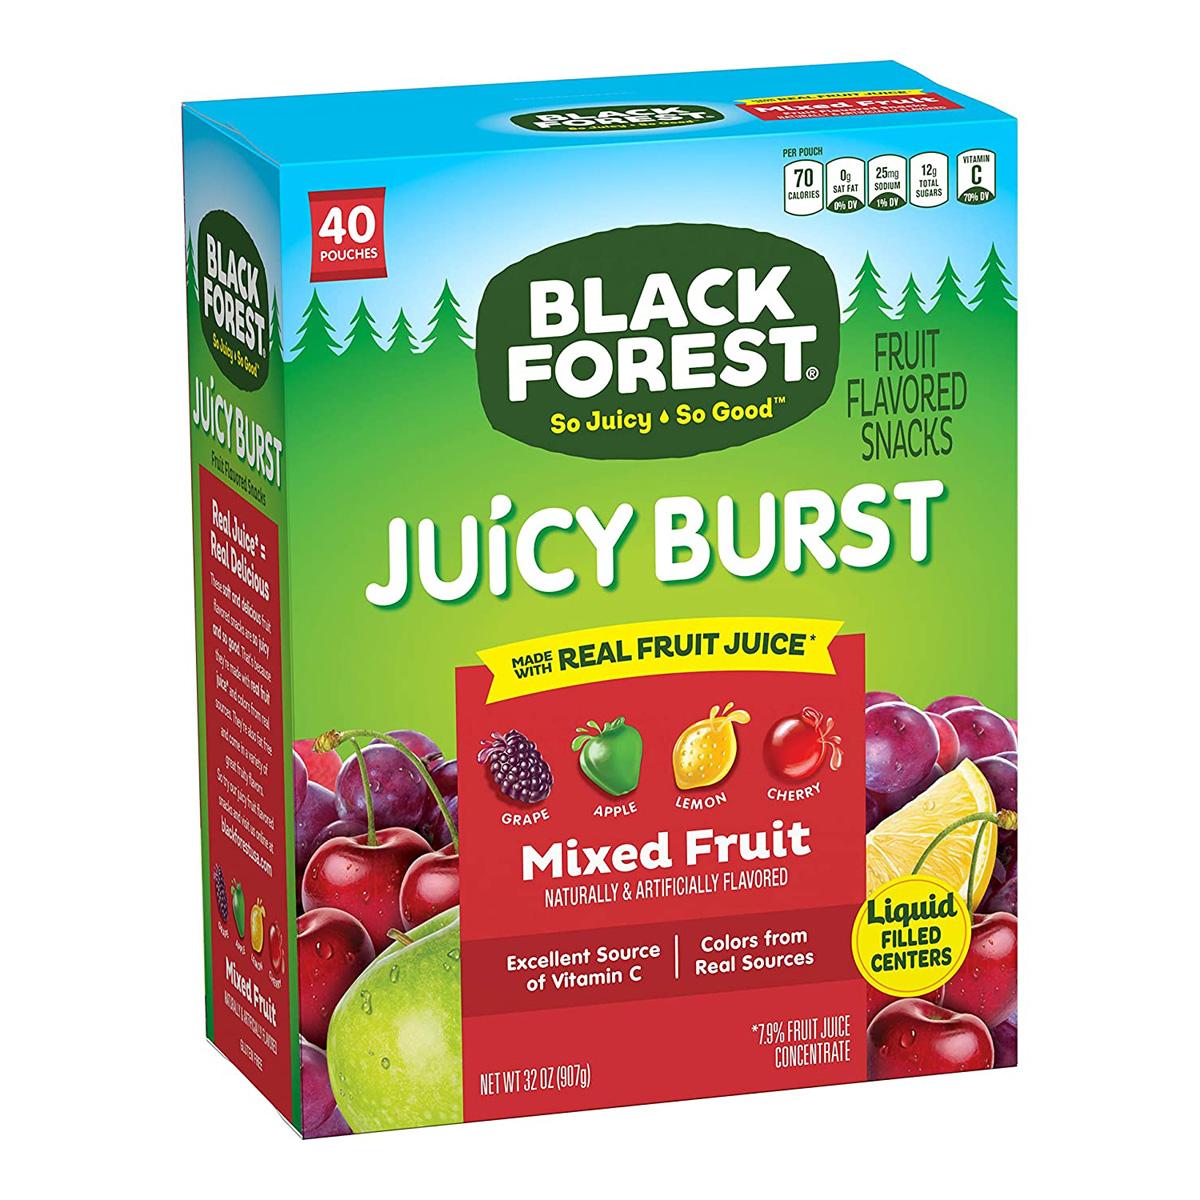 40 Black Forest Medley Juicy Center Fruit Snacks for $6.44 Shipped